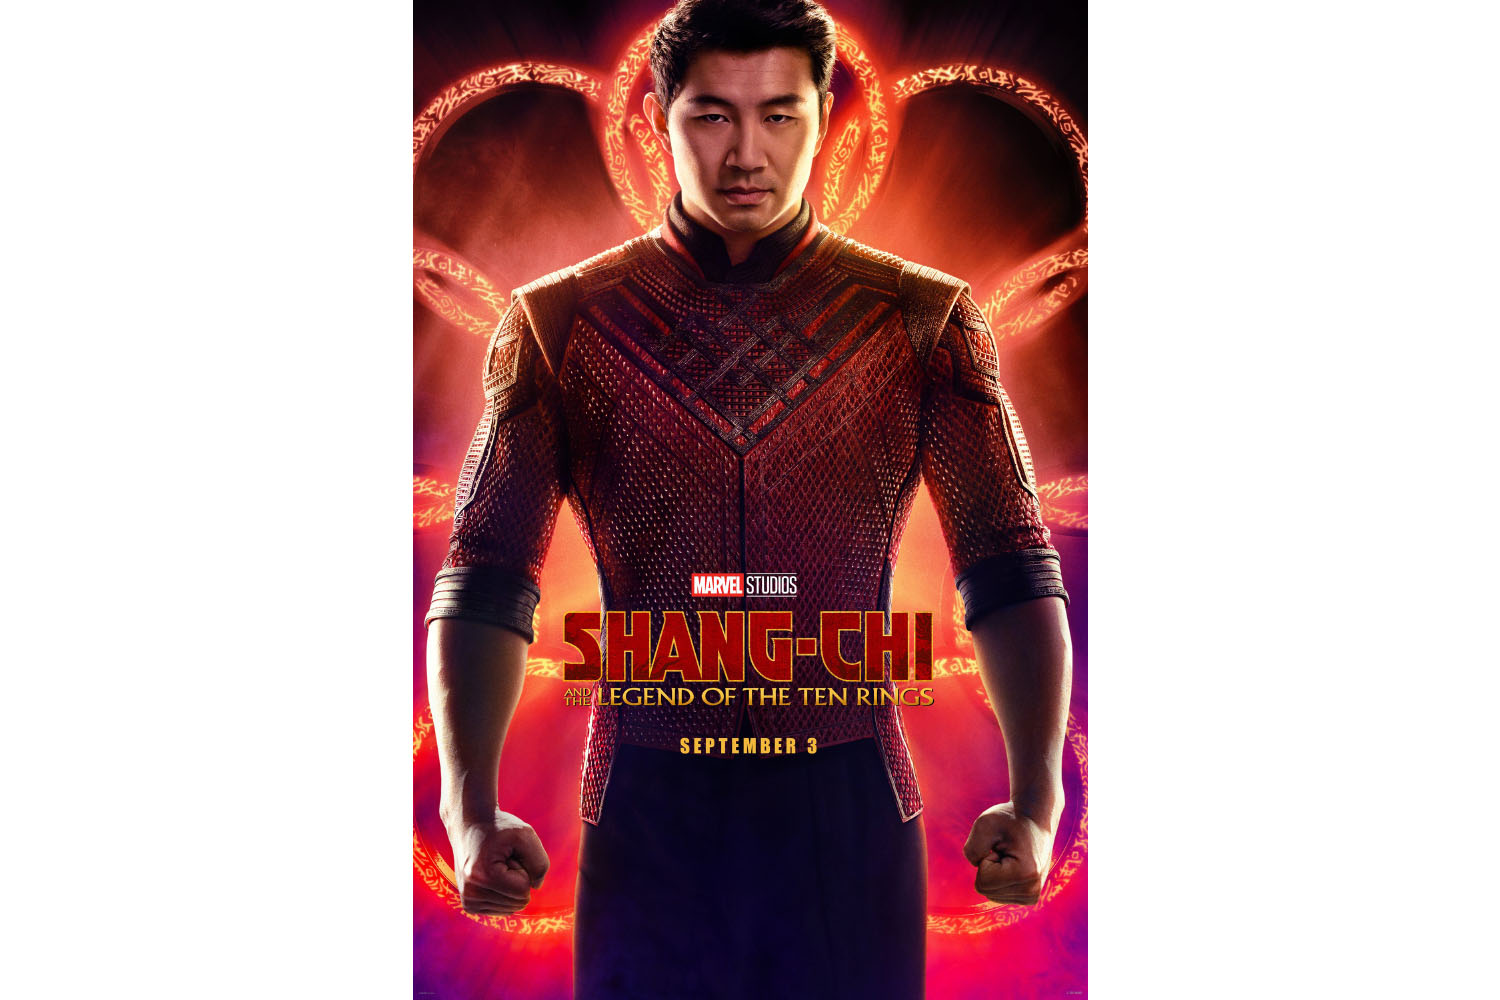 Shang-Chi 2 Star Reveals What to Expect In Sequel | The Direct